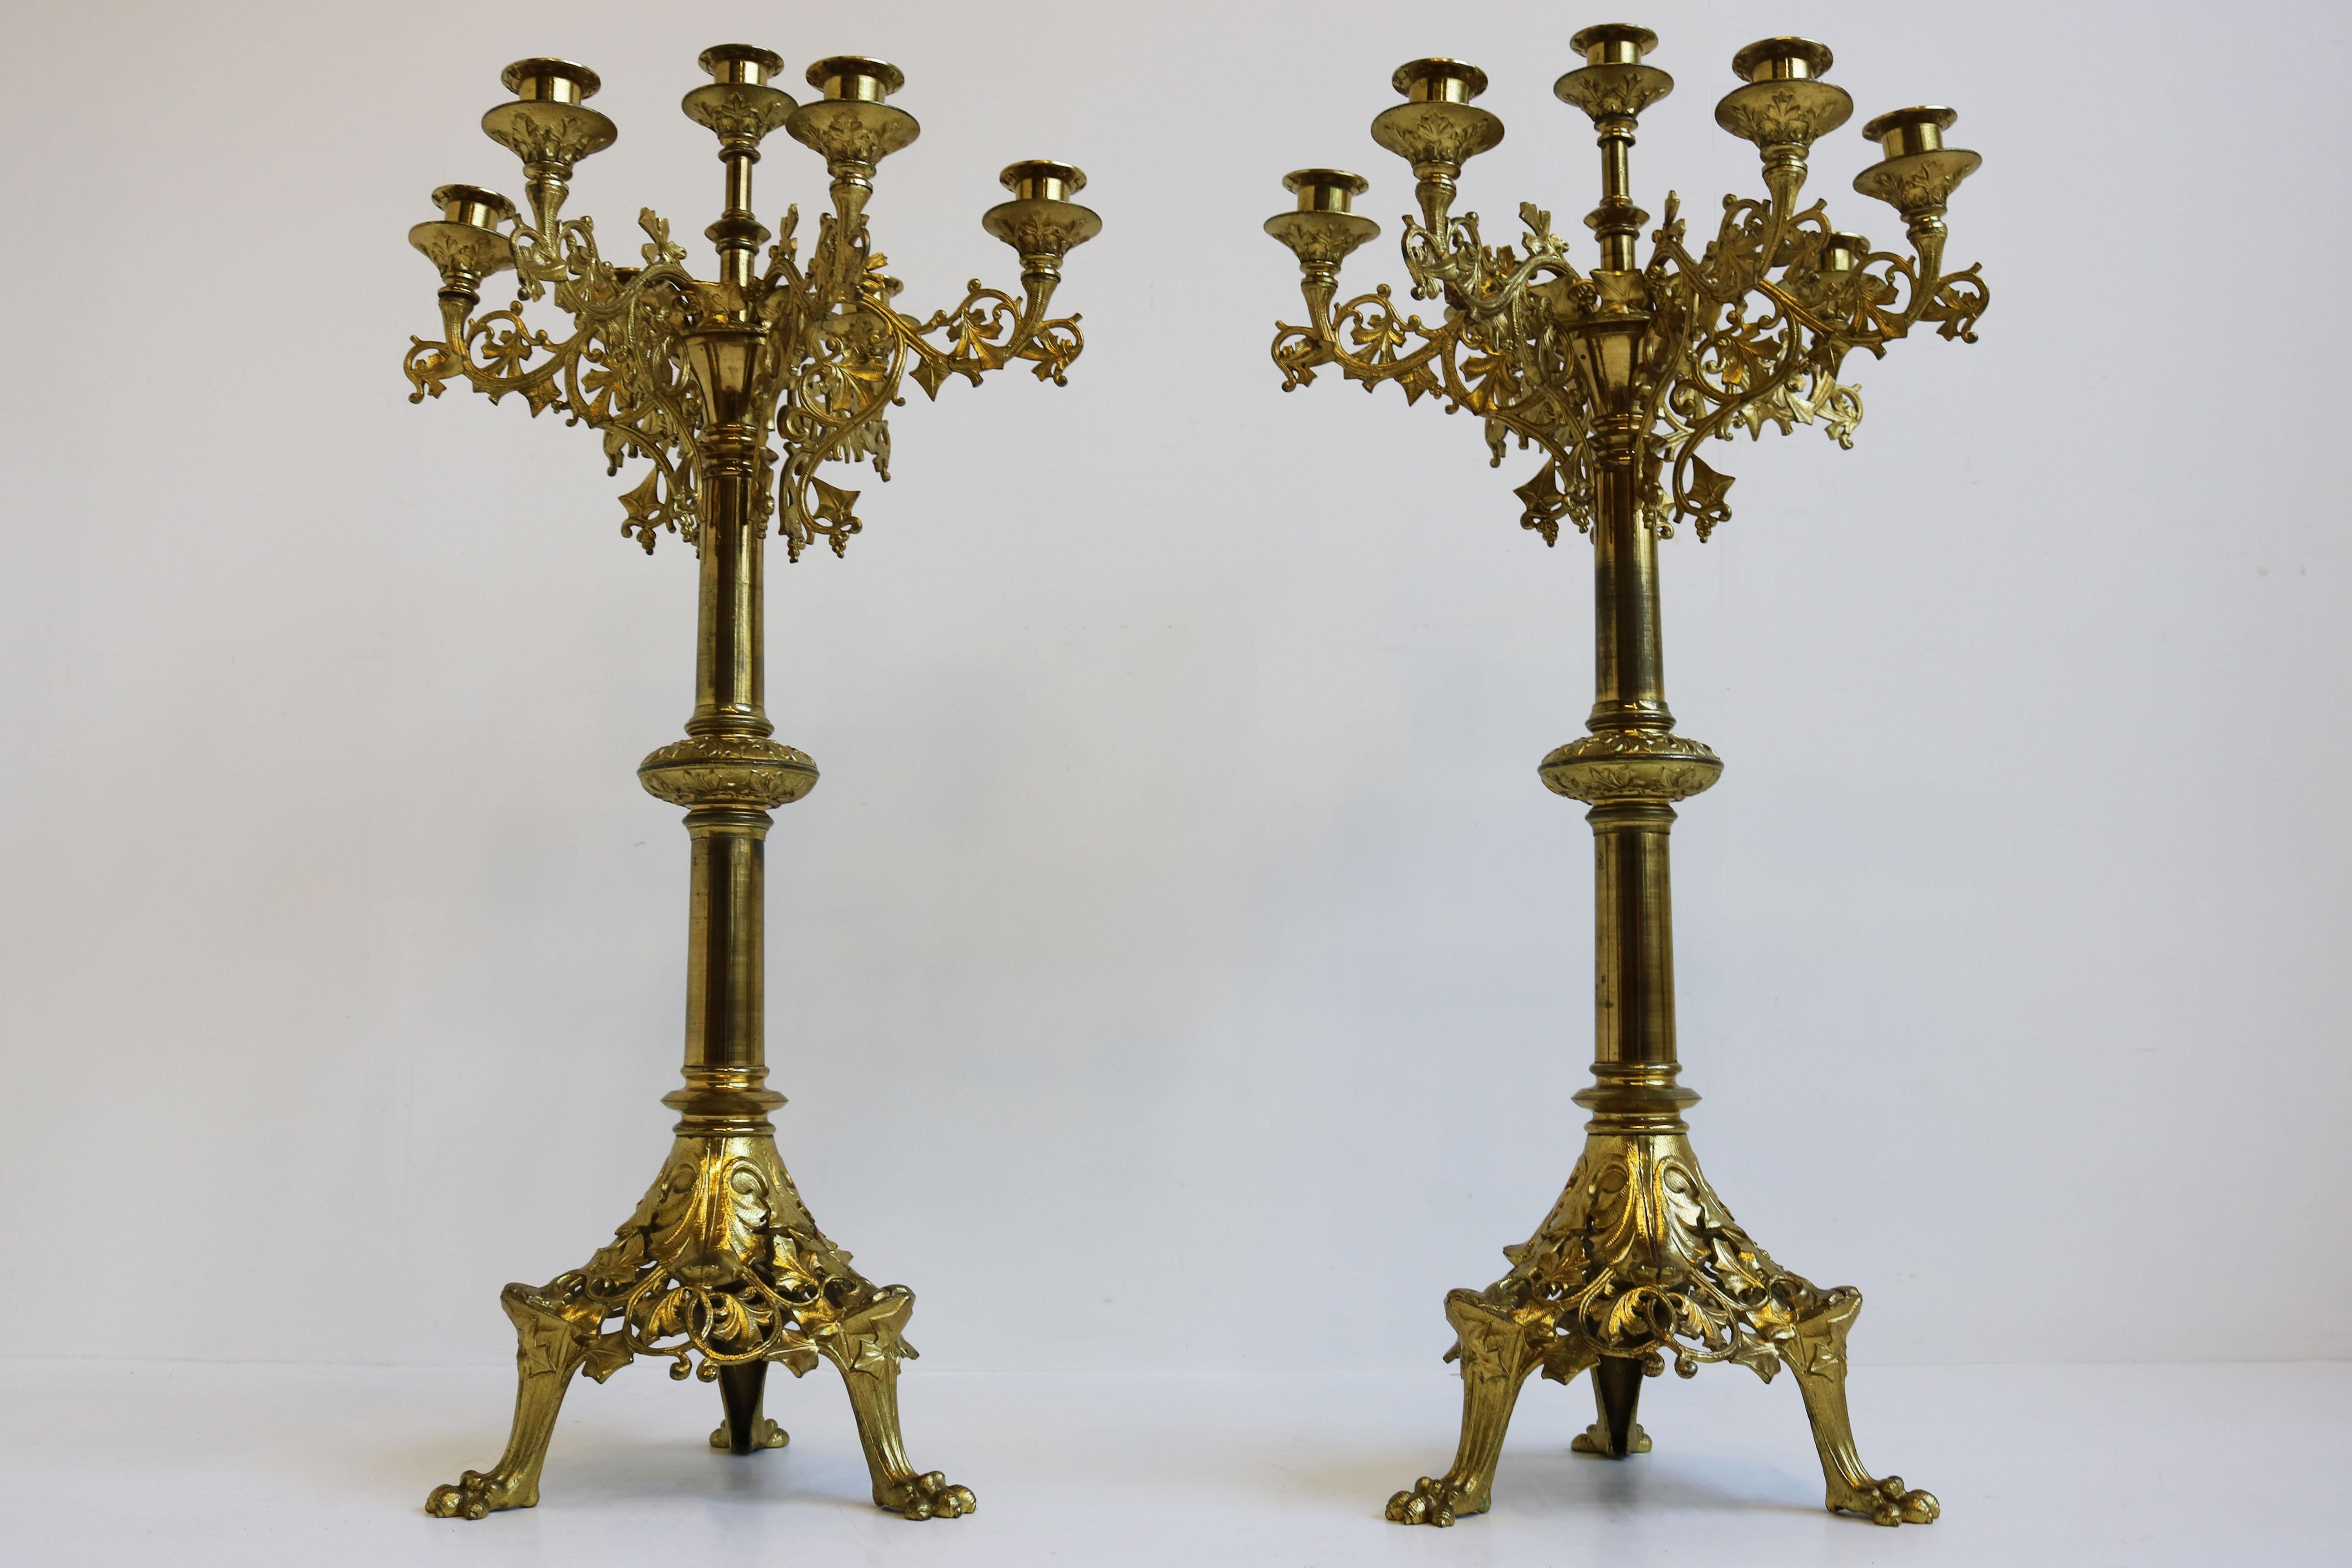 Huge Antique French Gilt Bronze Classical Clock Set 19th century Acanthus leaves For Sale 8